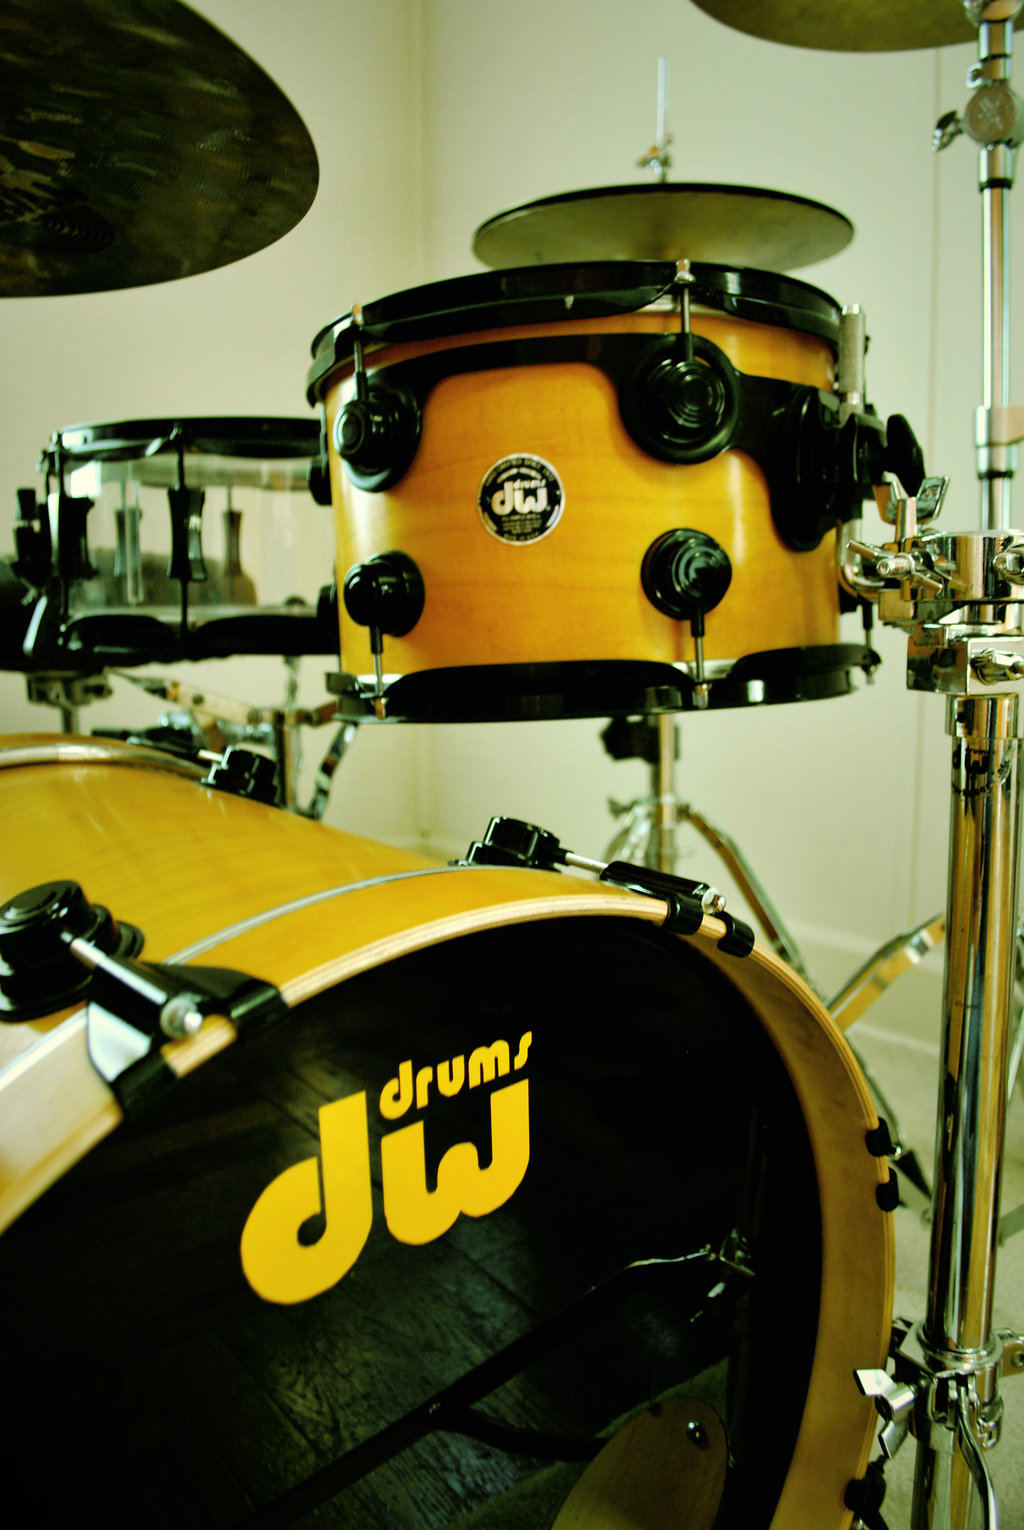 Dw Drums Wallpapers Imagen Dw Drums Wallpapers Fondo Dw Drums